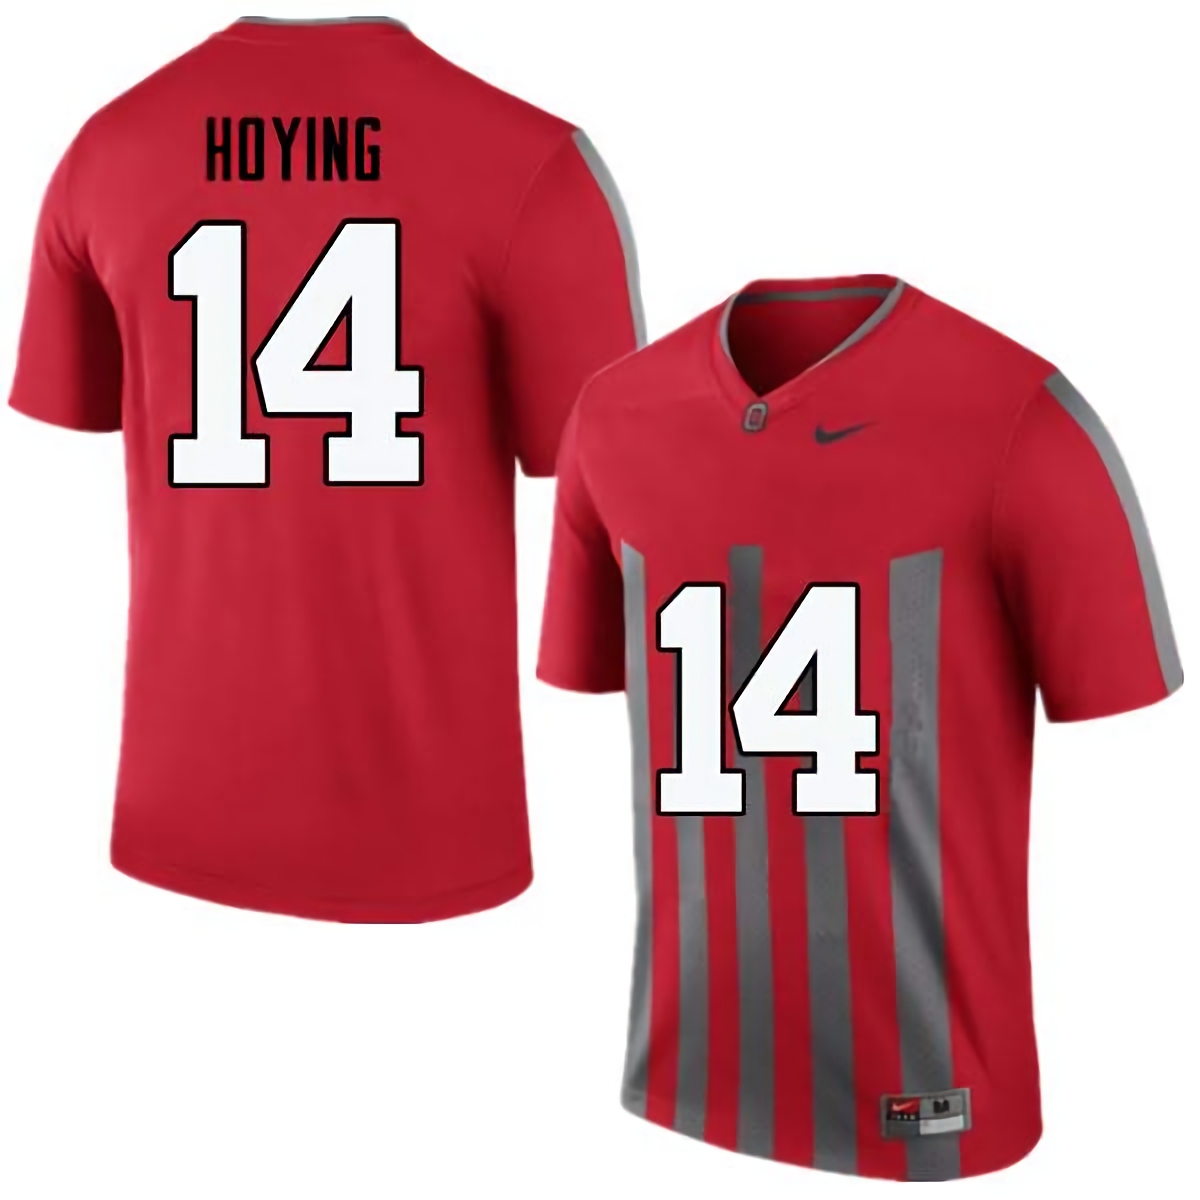 Bobby Hoying Ohio State Buckeyes Men's NCAA #14 Nike Throwback Red College Stitched Football Jersey DGQ5856RH